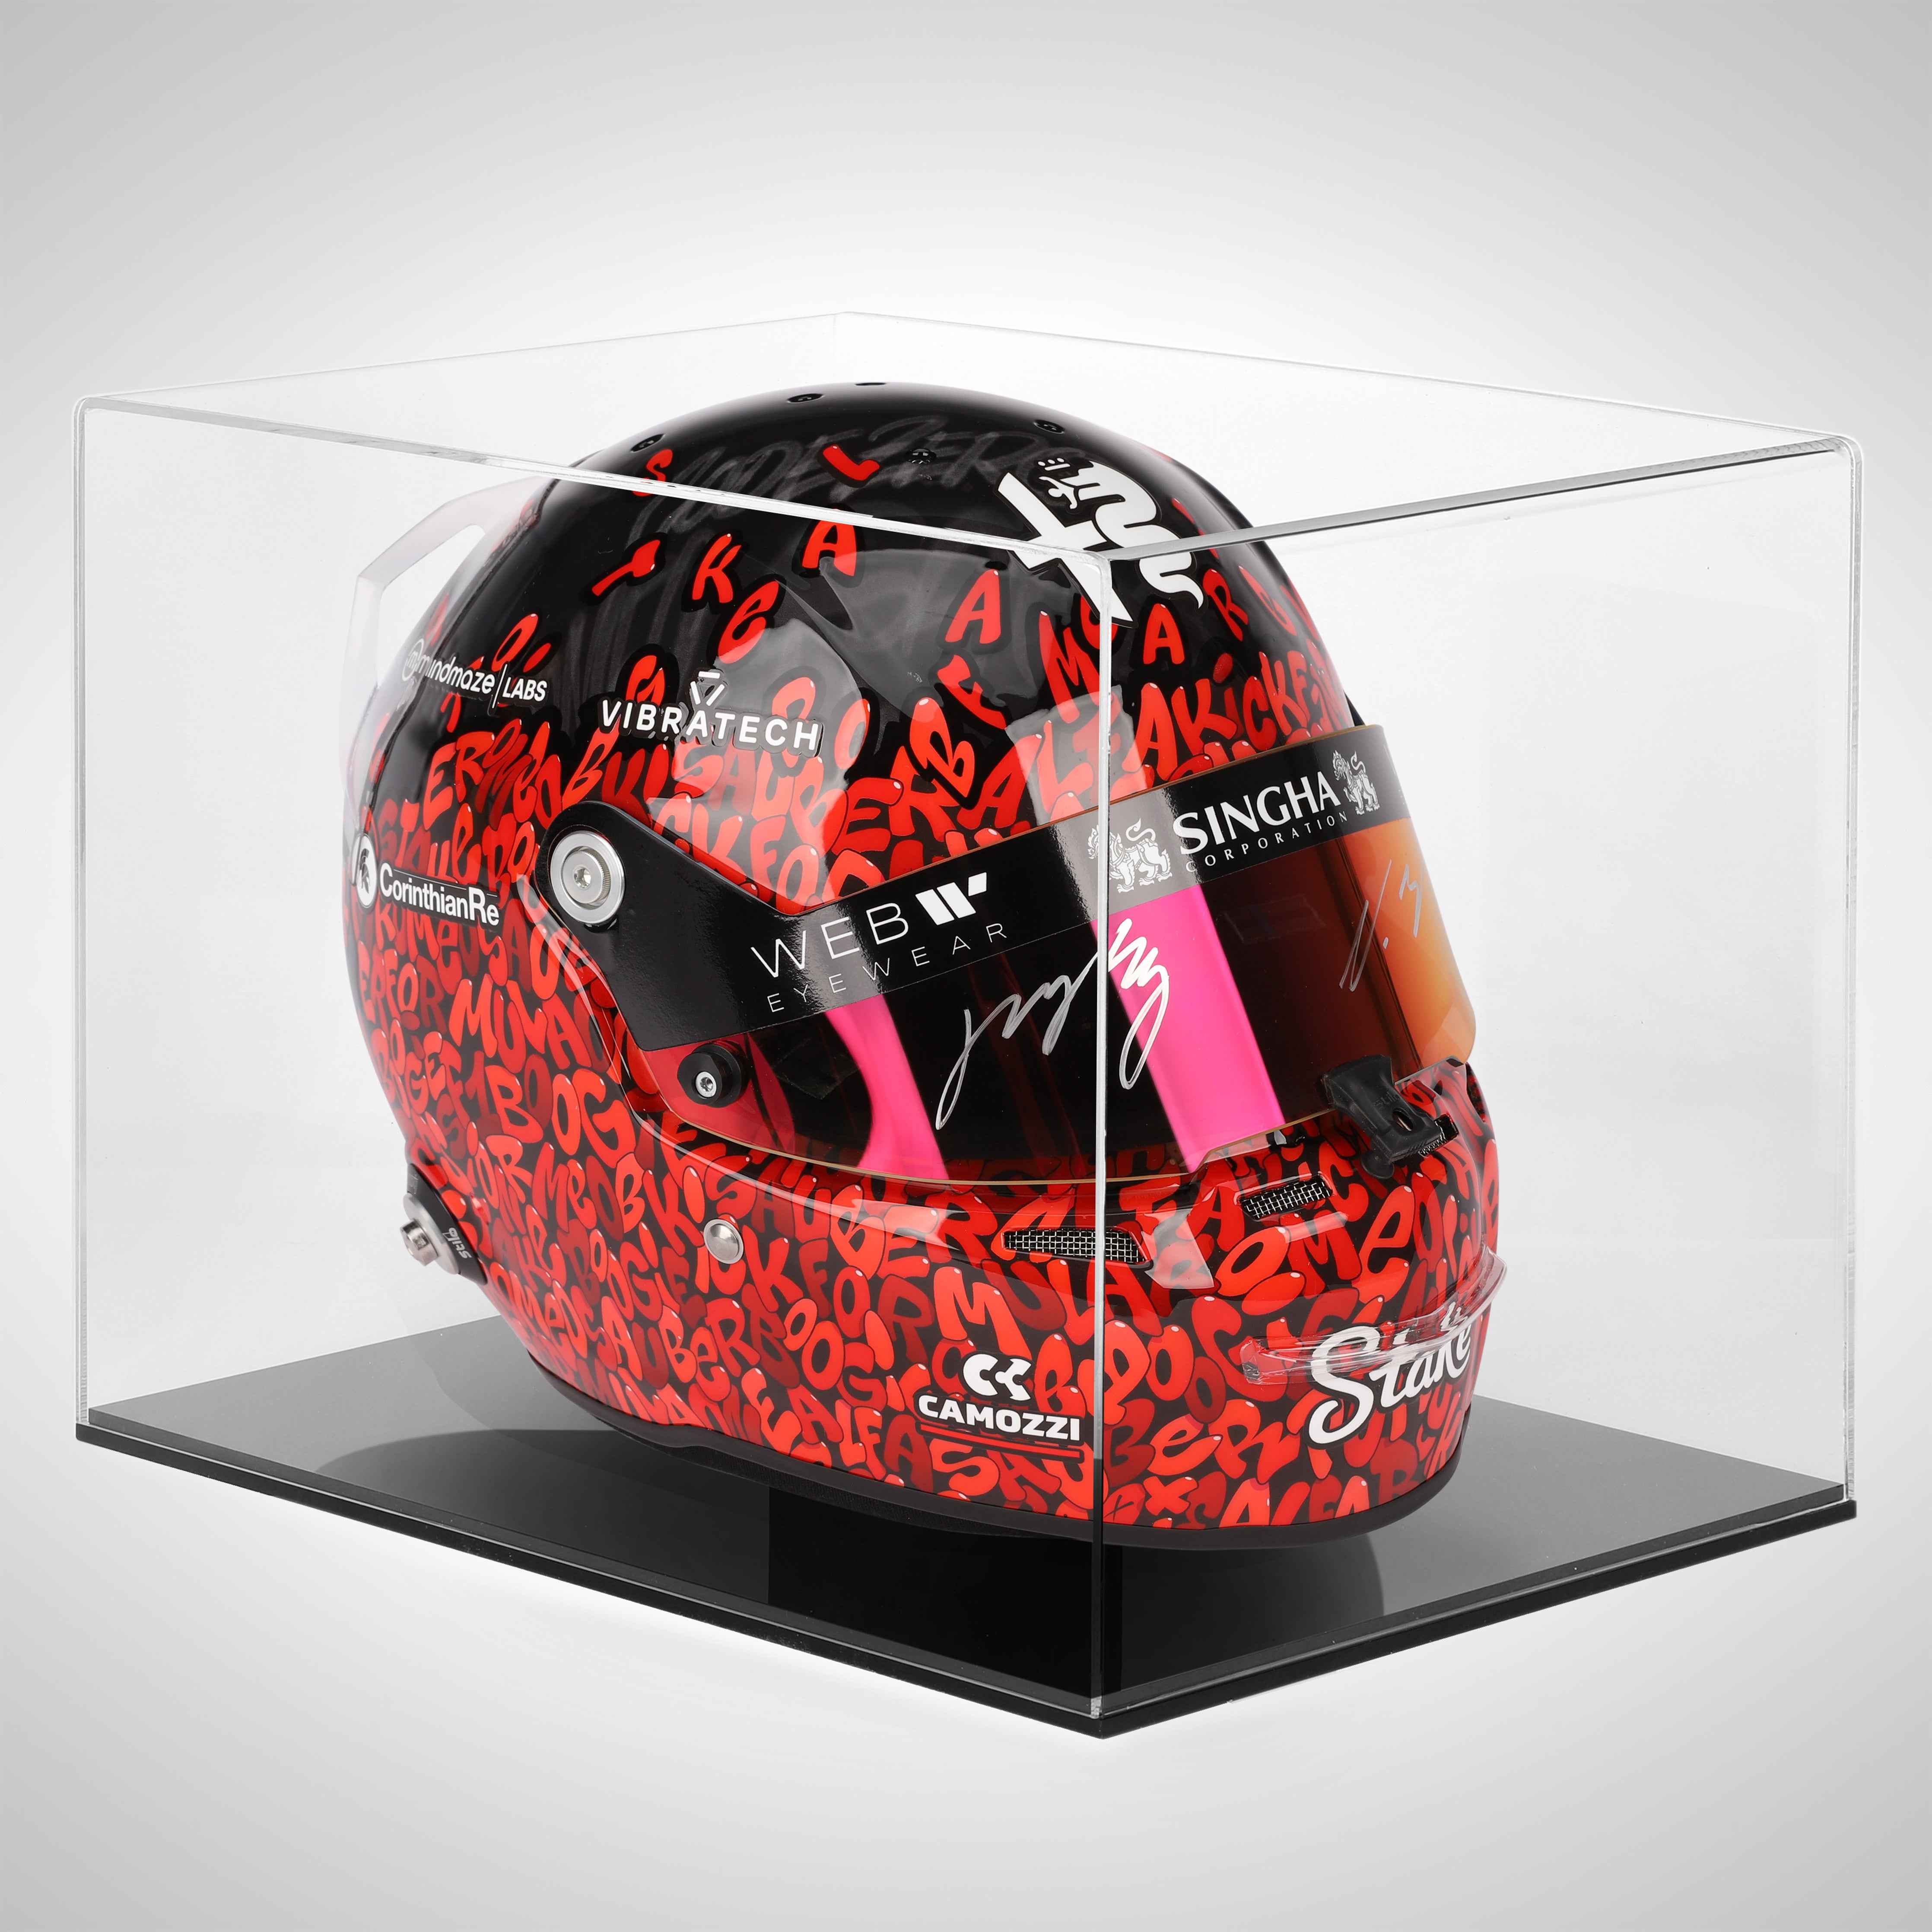 Officially Licensed Alfa Romeo F1 Team Stake 2023 Dual Signed 'BOOGIE' Replica Helmet